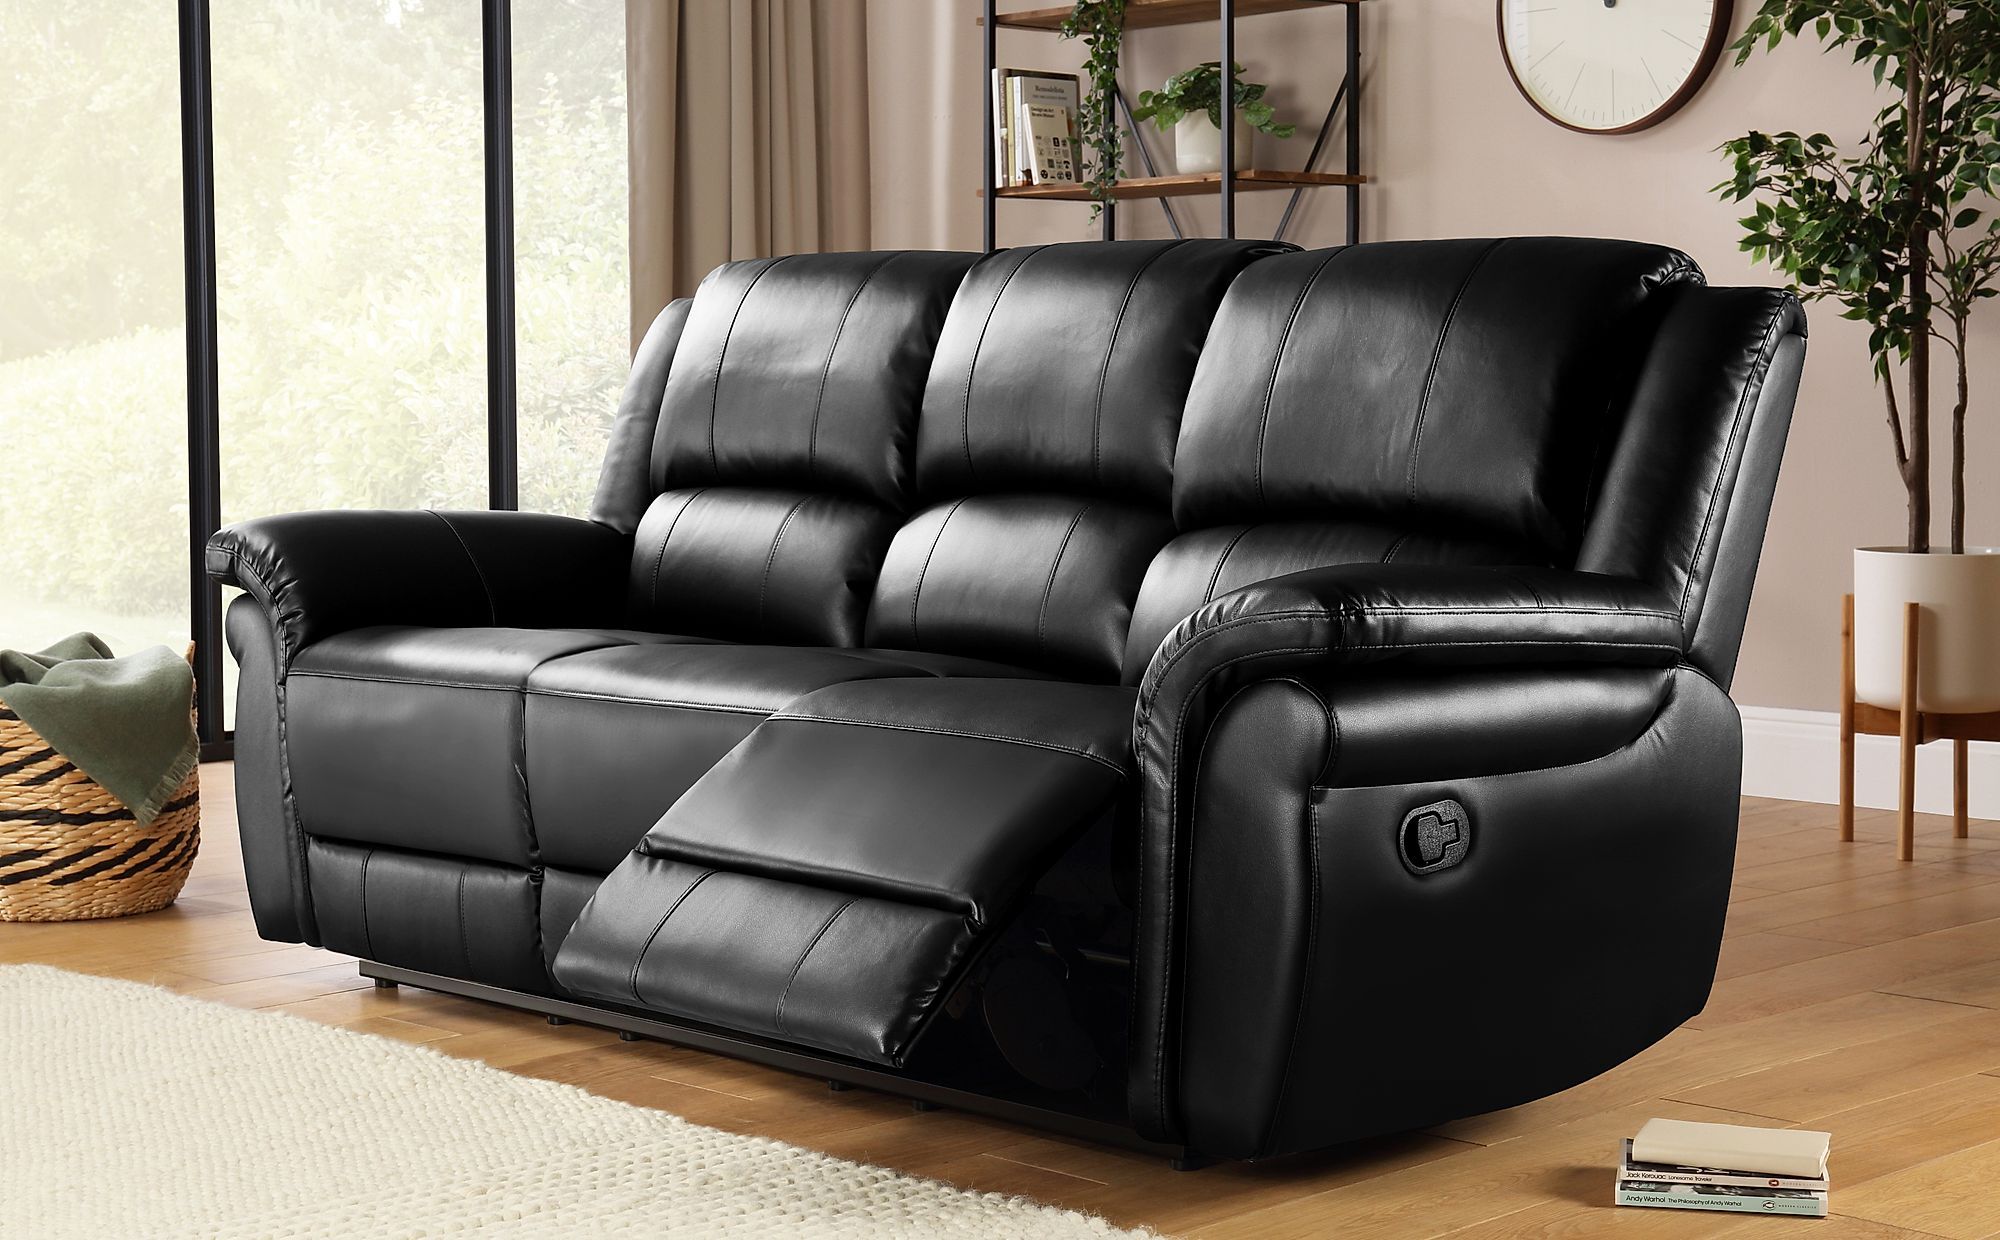 Lombard Black Leather 3 Seater Recliner Sofa | Furniture Choice In 3 Seat L Shaped Sofas In Black (Gallery 7 of 20)